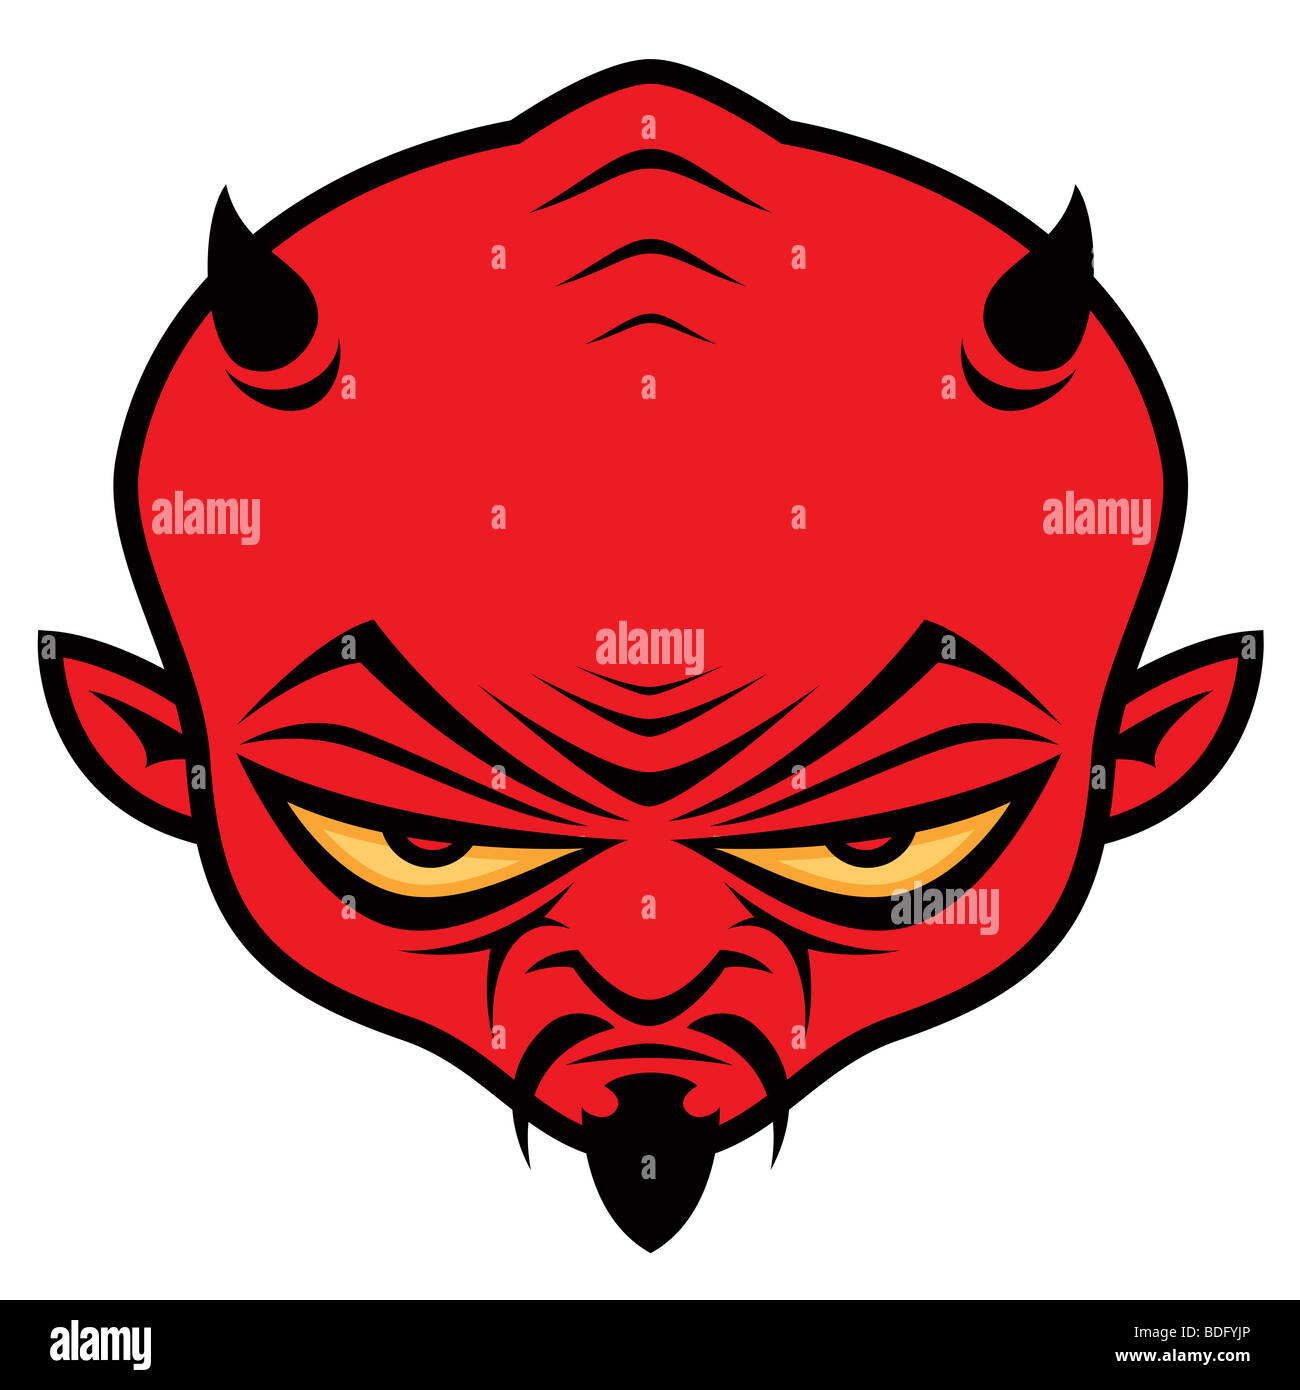 Devil Dude. Cartoon illustration of a mean devil character with horns, mustache and goatee. Stock Photo